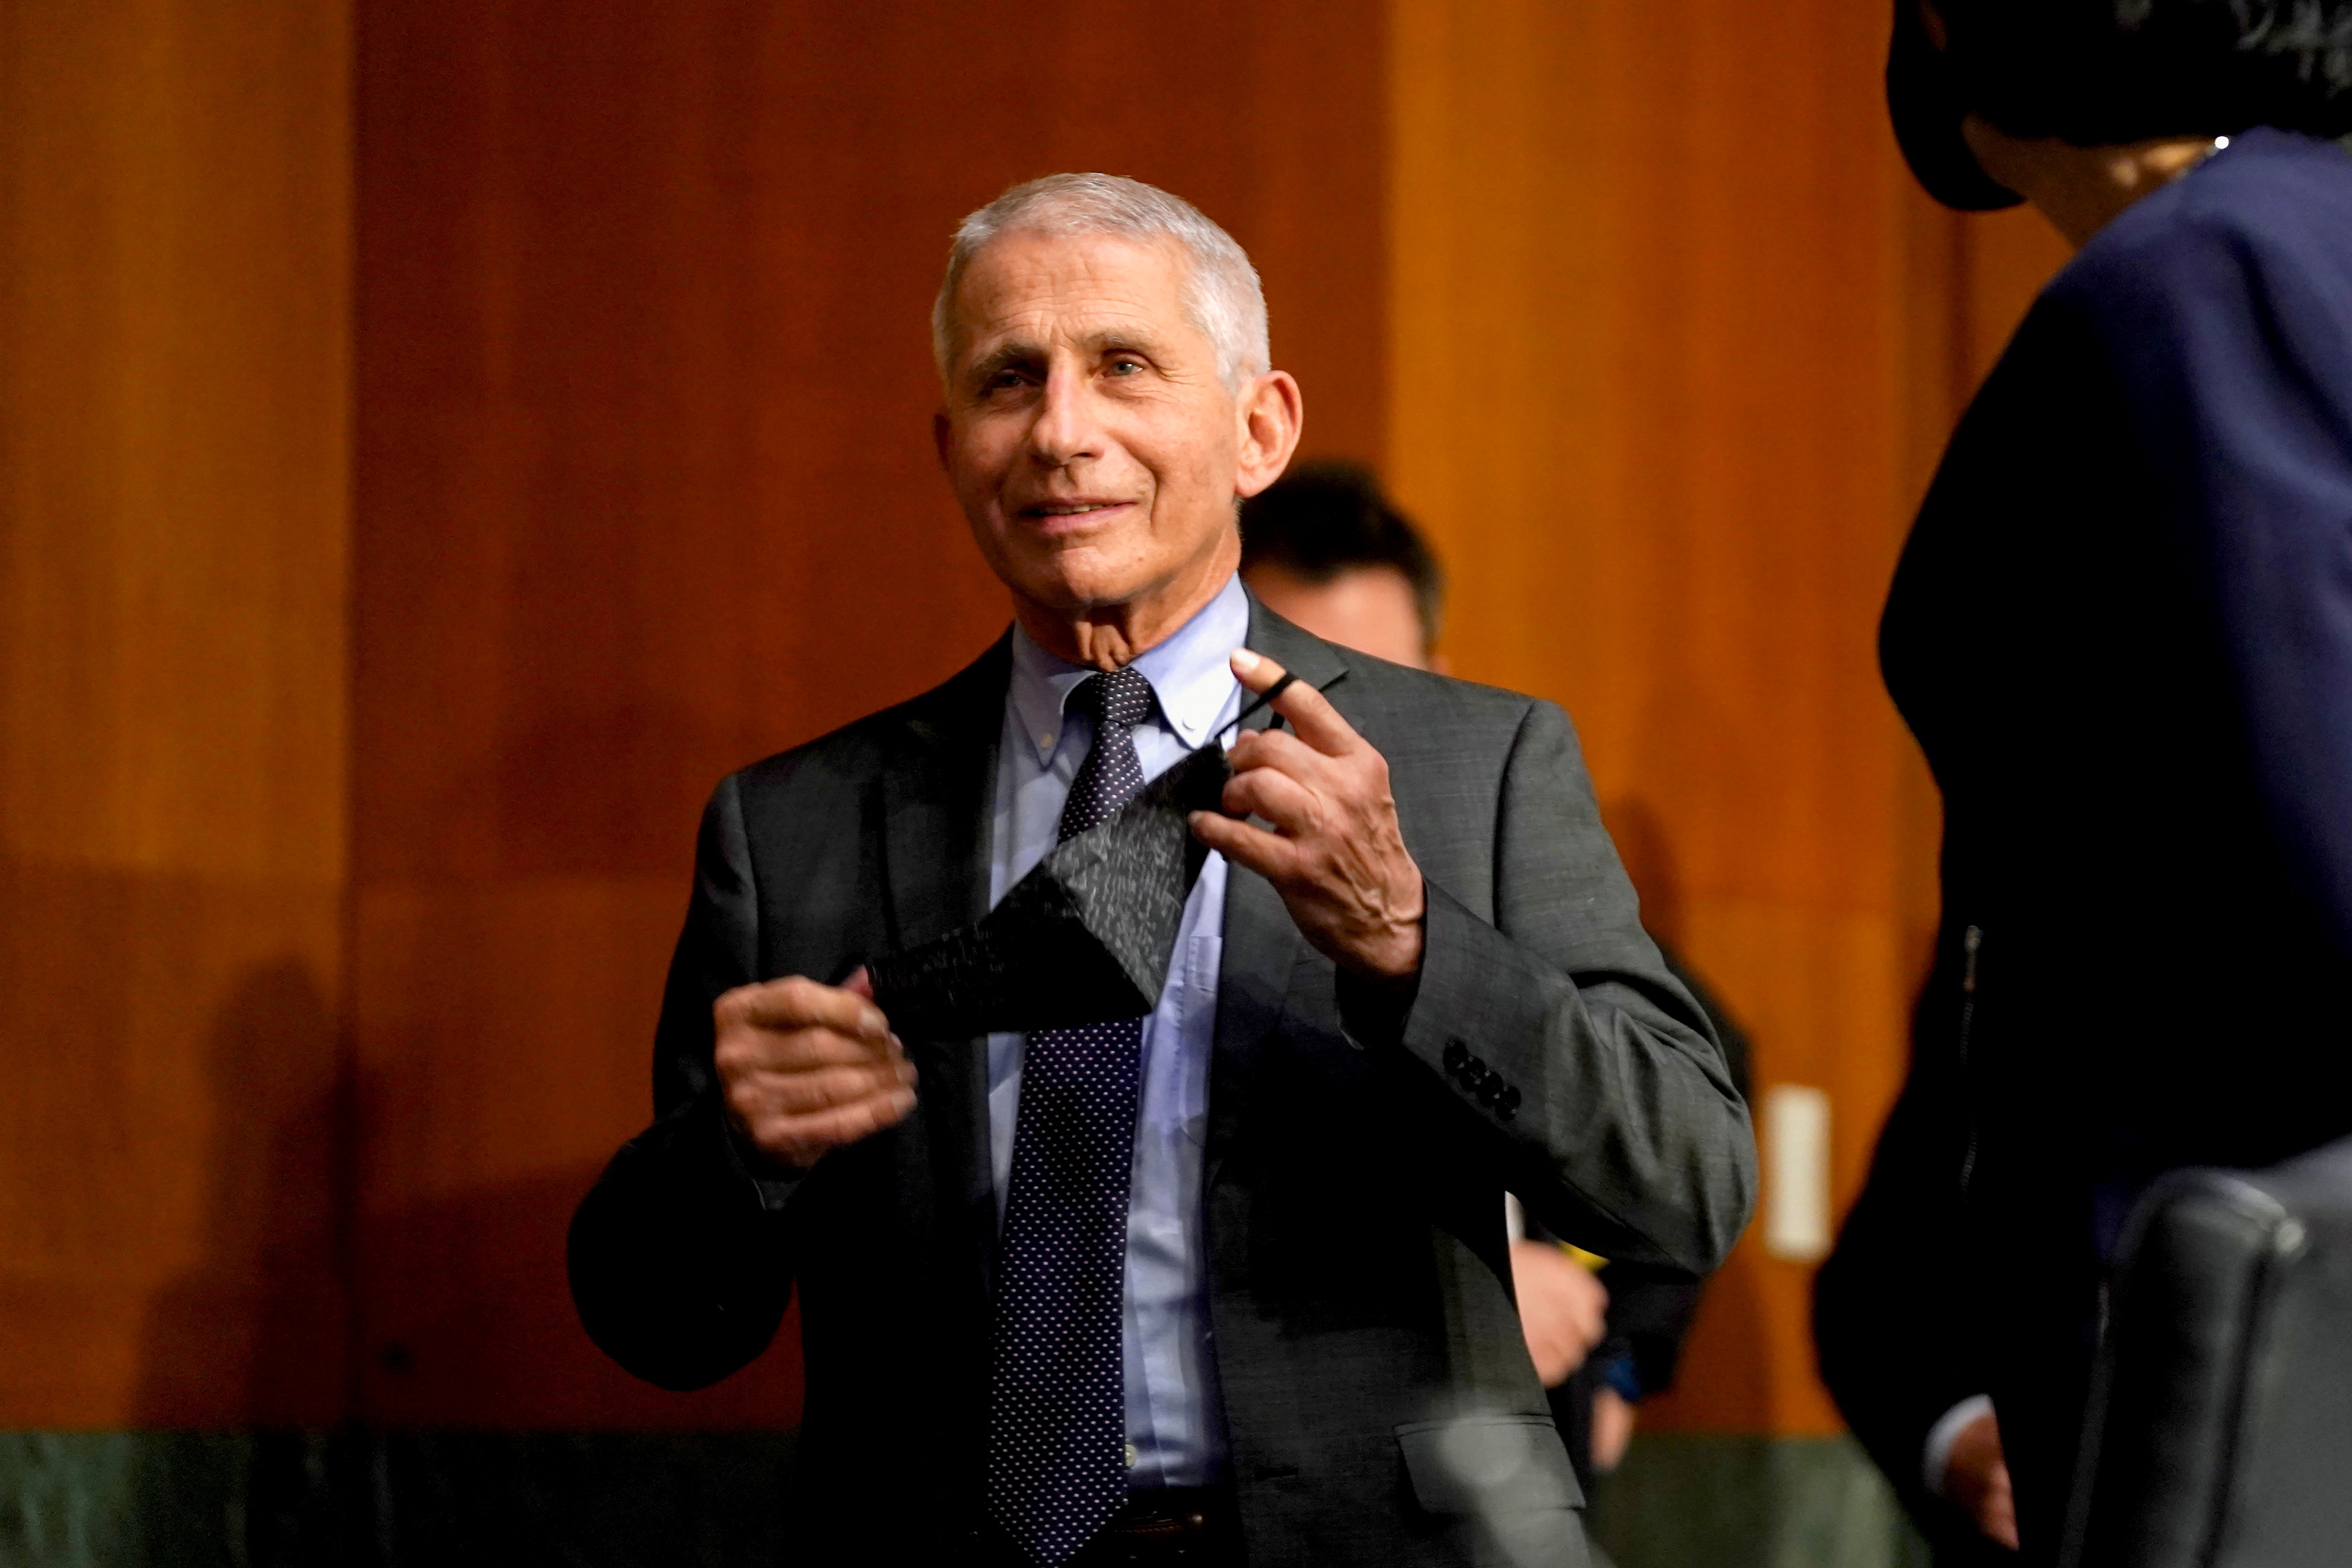 Dr. Anthony Fauci, director of the National Institute of Allergy and Infectious Diseases, arrives for a Senate Health, Education, Labor and Pensions Committee hearing to discuss the on-going federal response to COVID-19, at the U.S. Capitol in Washington, D.C., U.S., May 11, 2021. Greg Nash/Pool via REUTERS